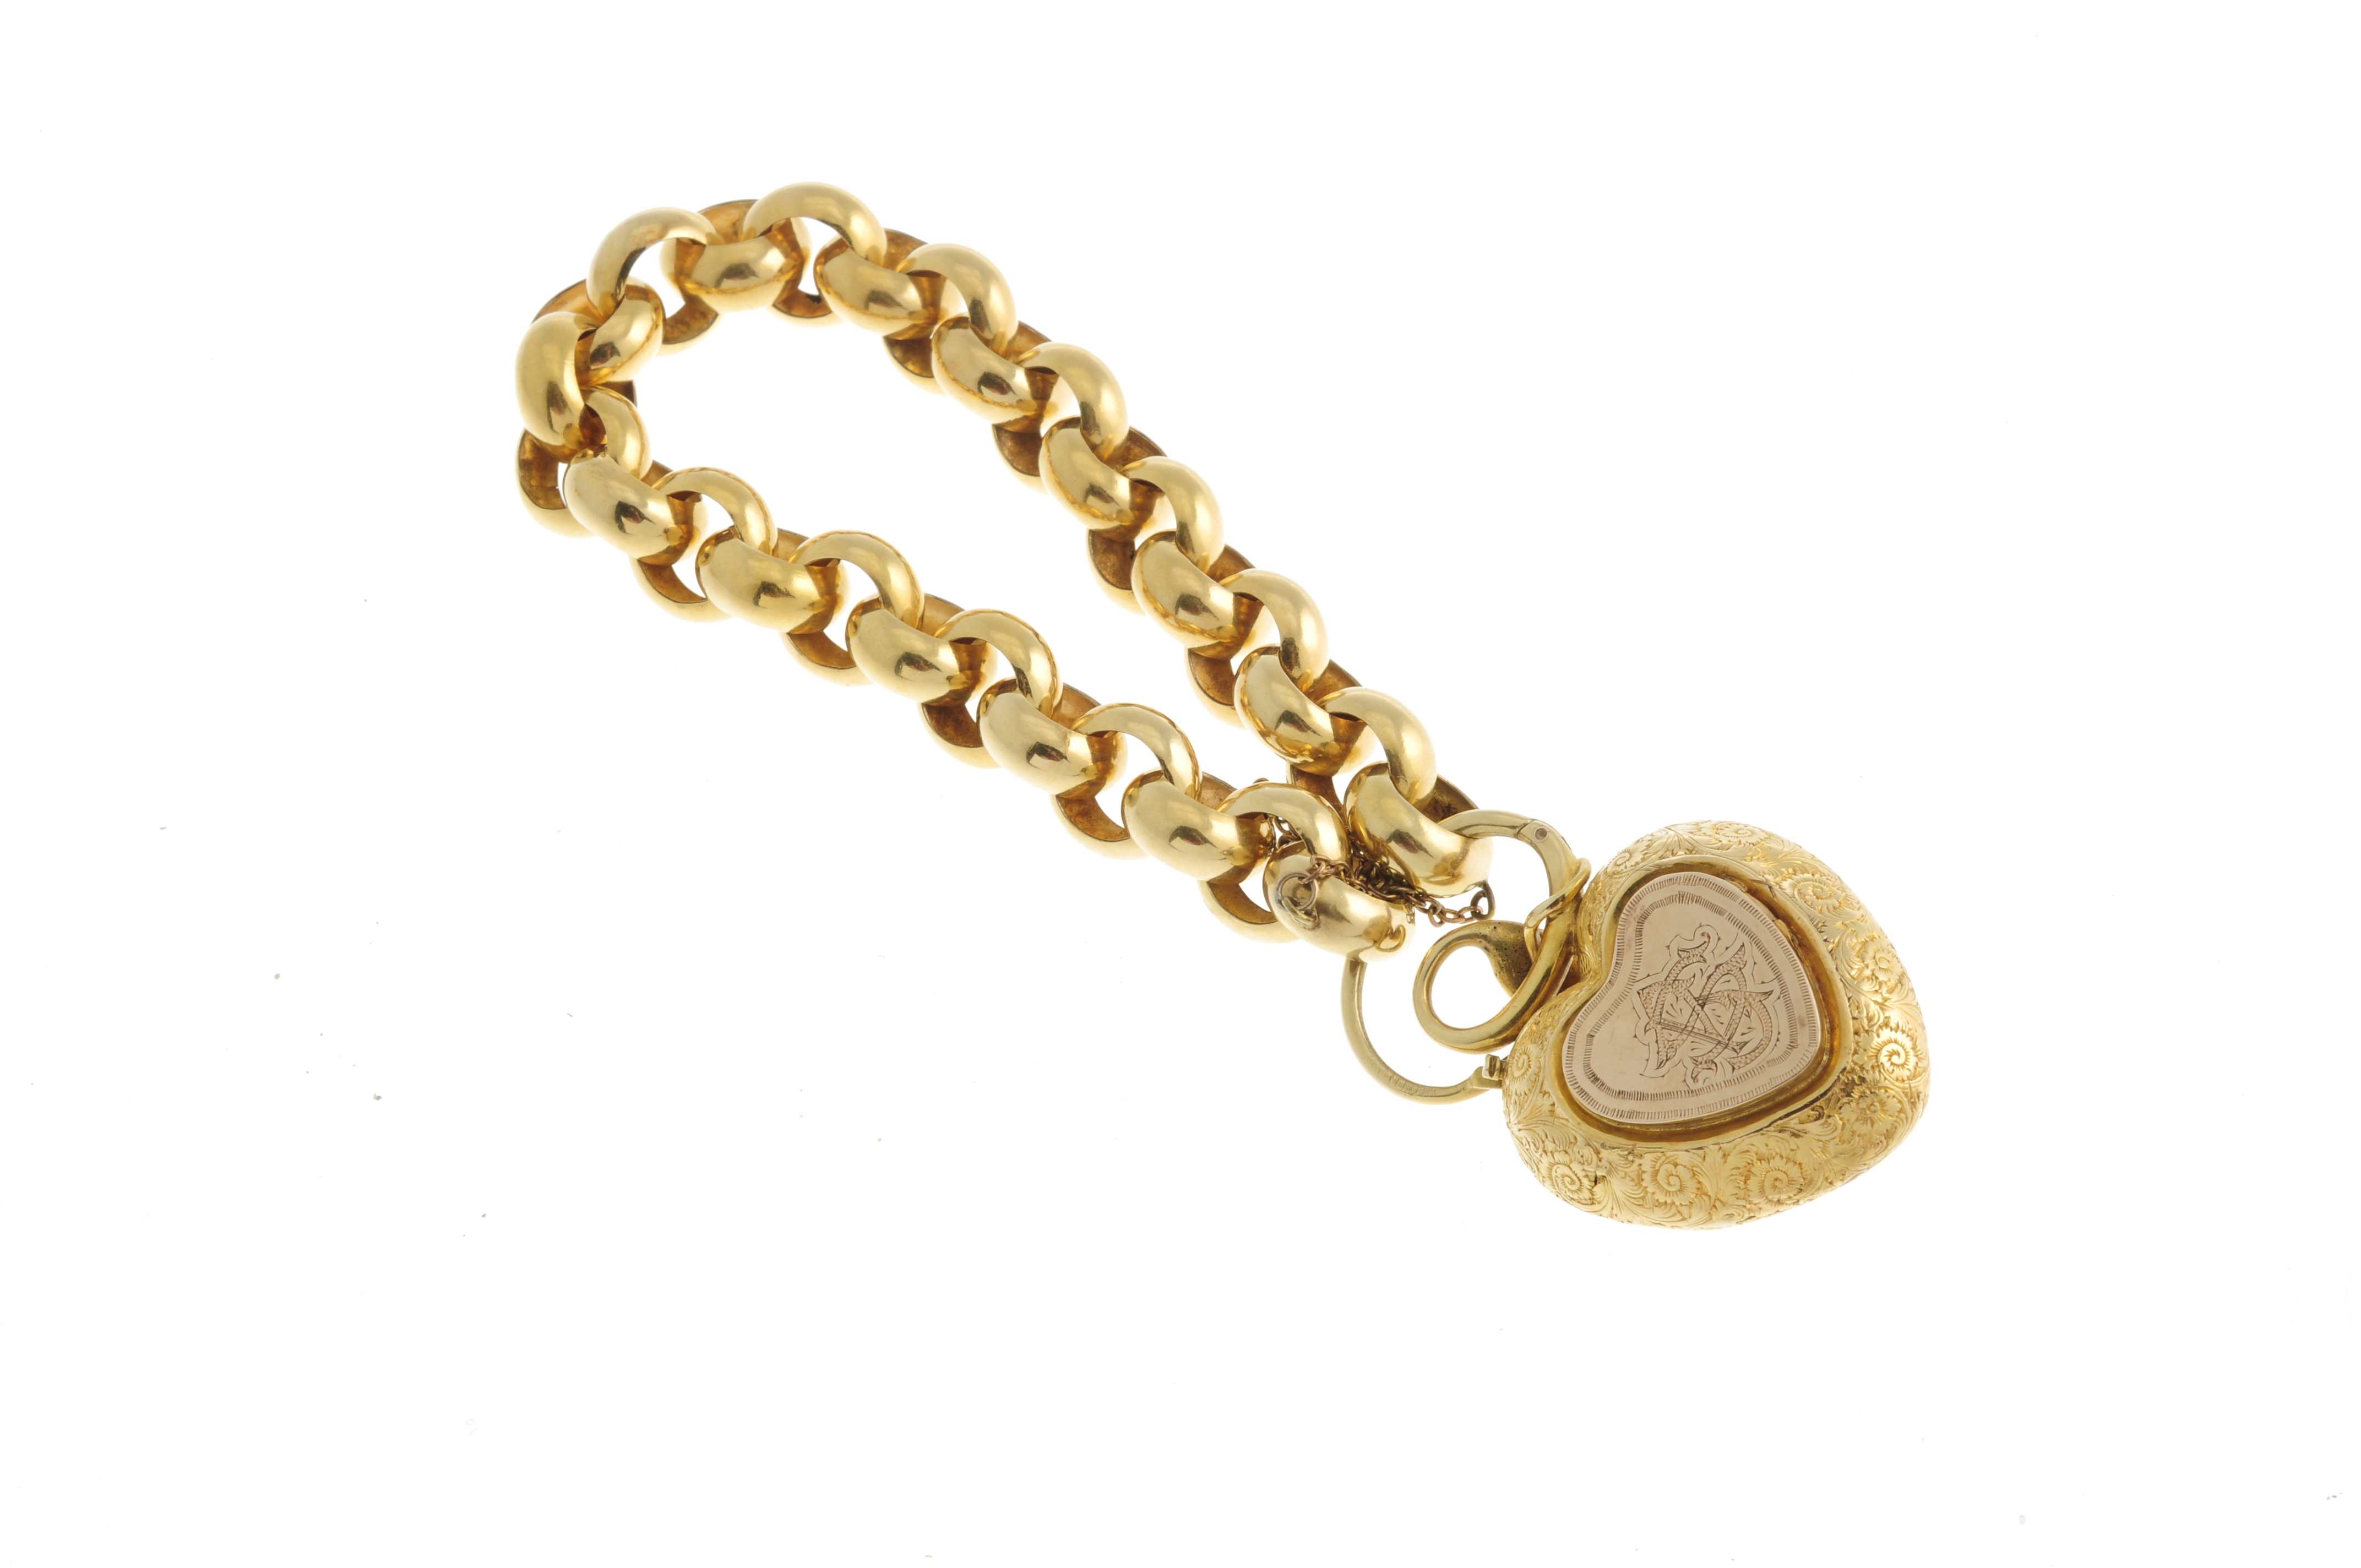 A mid 19th century gold bracelet with carved coral padlock clasp. The broad link belcher chain, with - Bild 2 aus 2